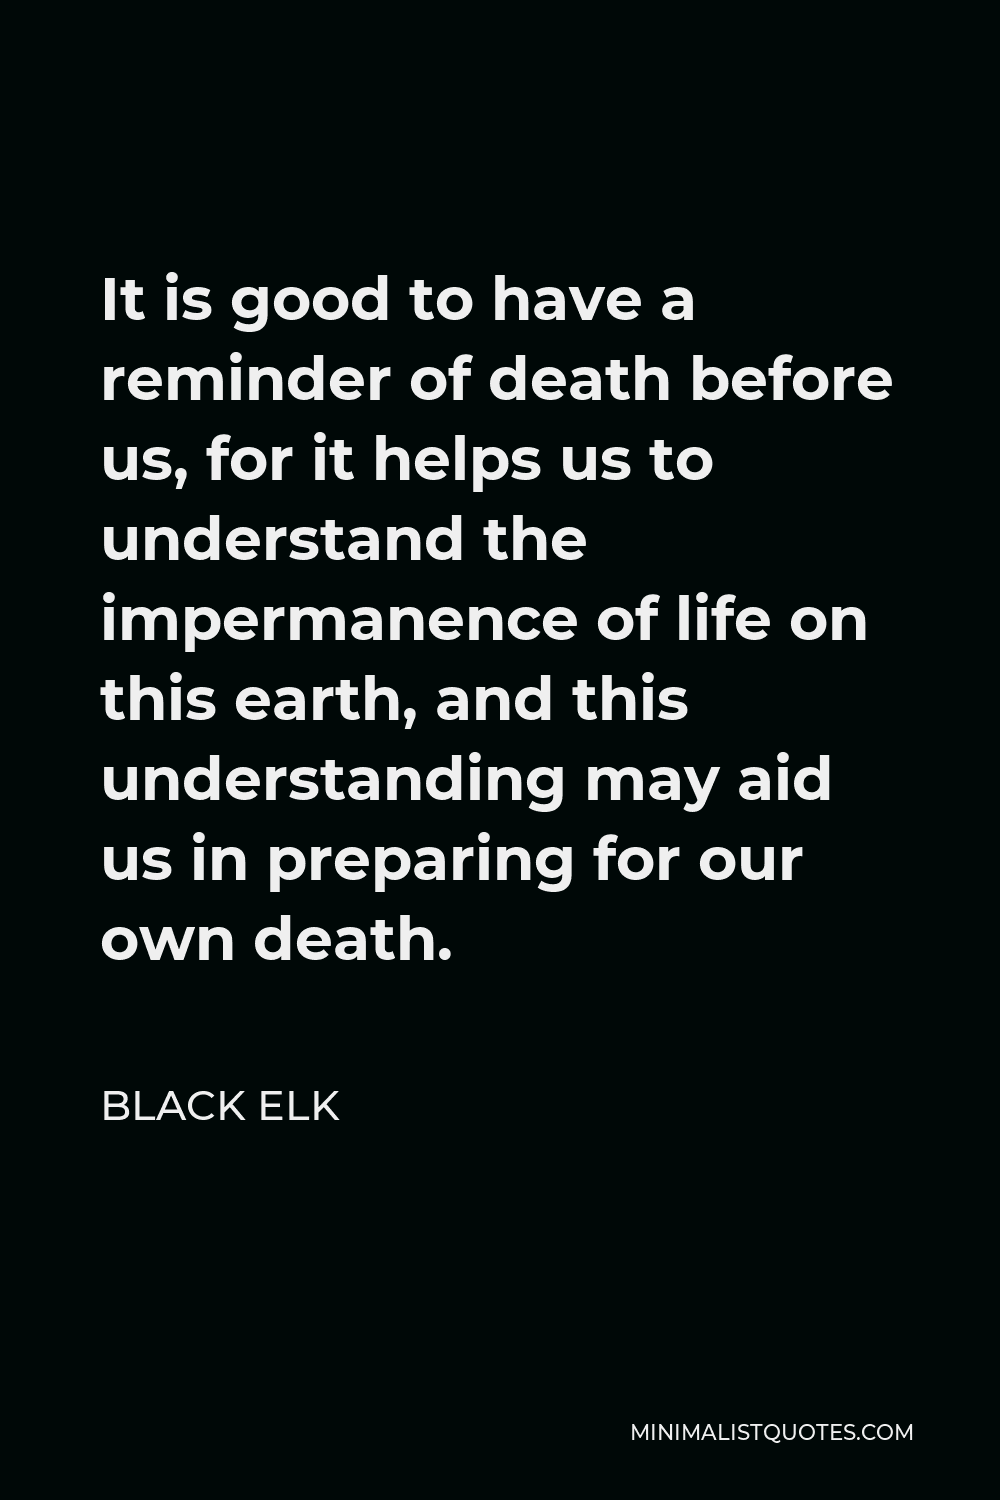 Black Elk Quote - It is good to have a reminder of death before us, for it helps us to understand the impermanence of life on this earth, and this understanding may aid us in preparing for our own death.